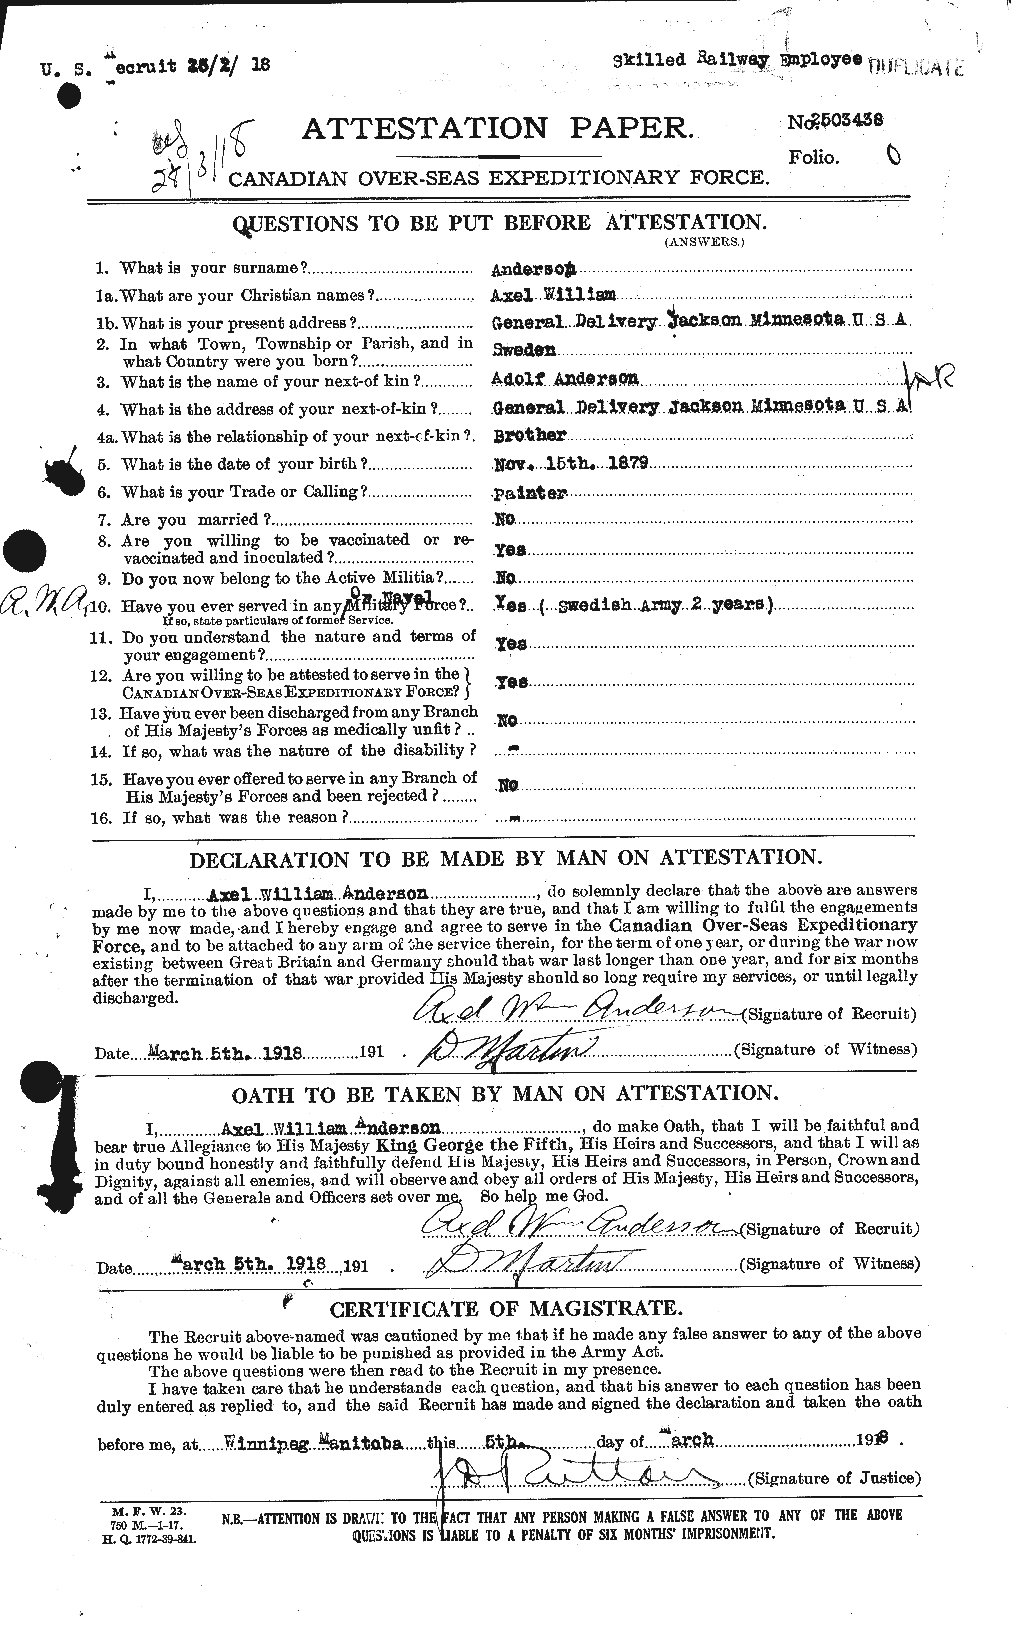 Personnel Records of the First World War - CEF 209326a